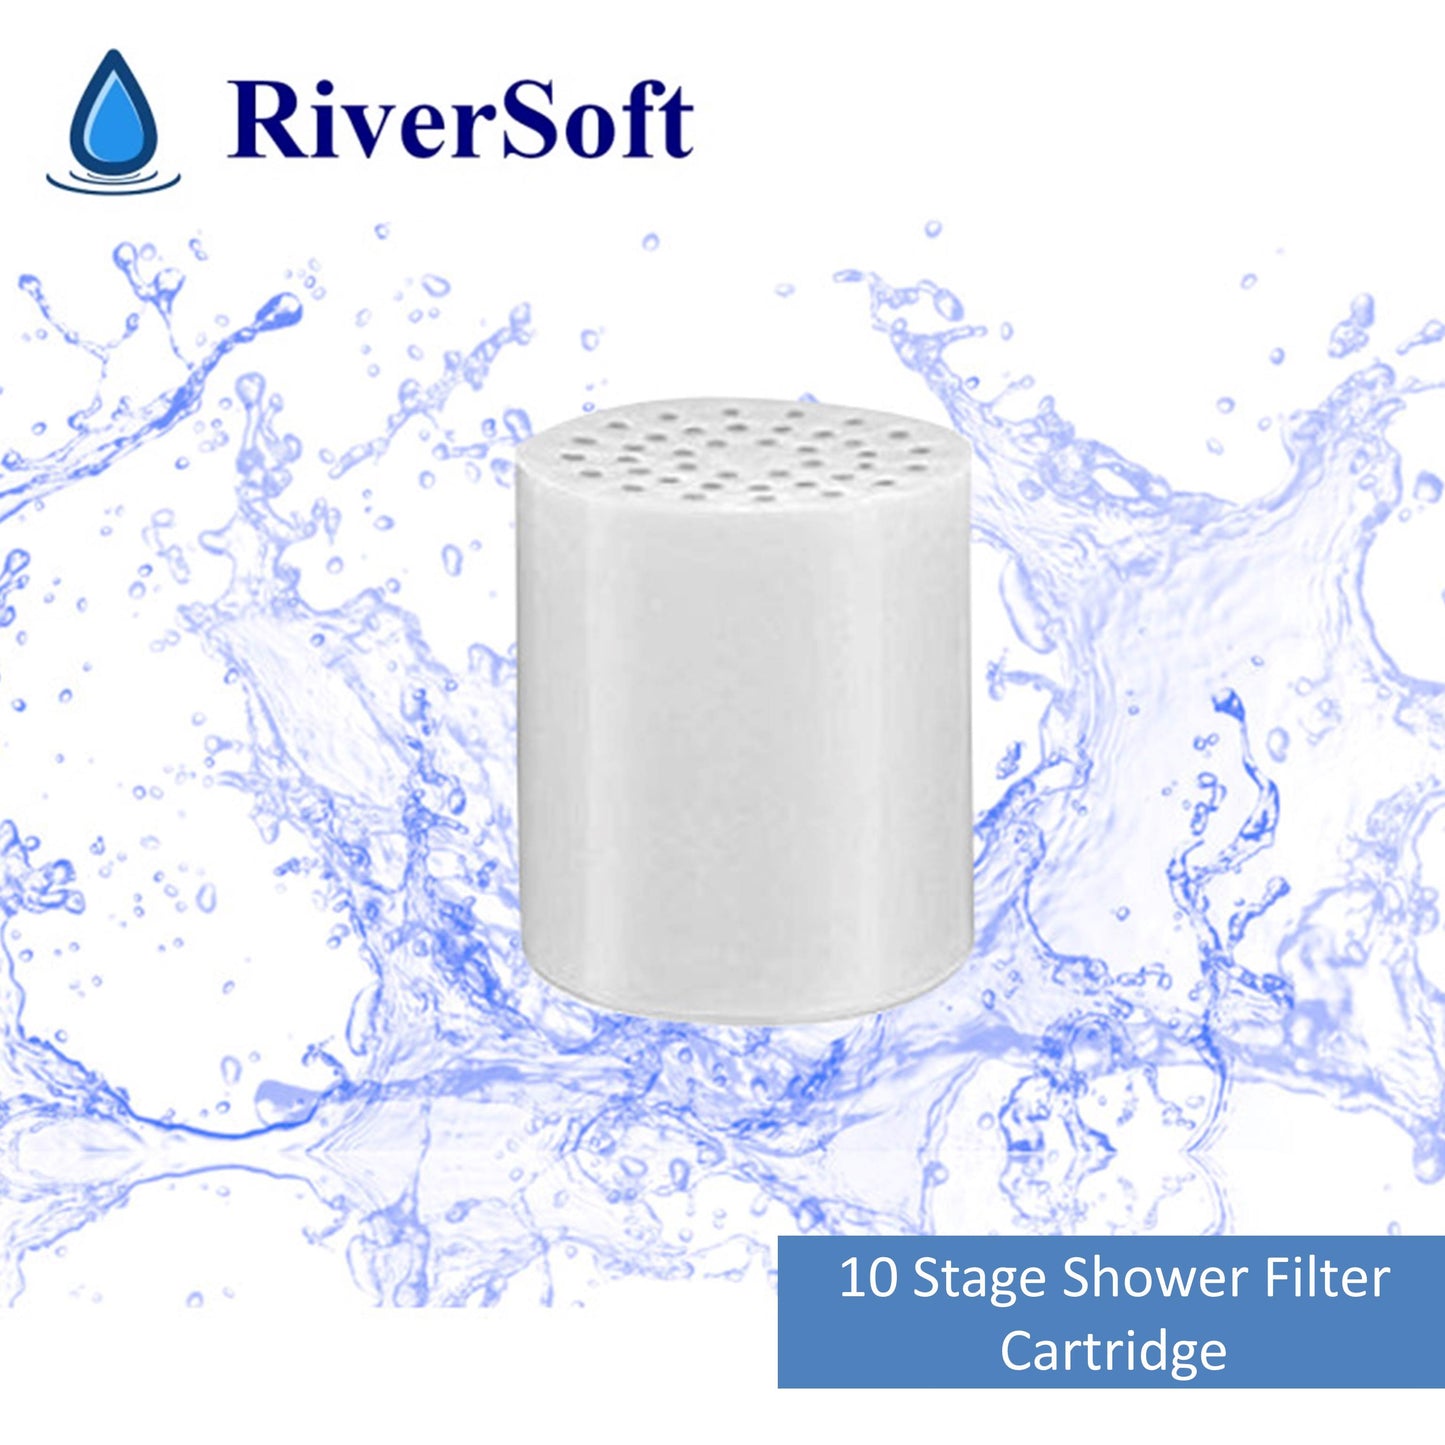 SFC-10 shower filter and tap filter cartridge with 10 stage | Replacement filter